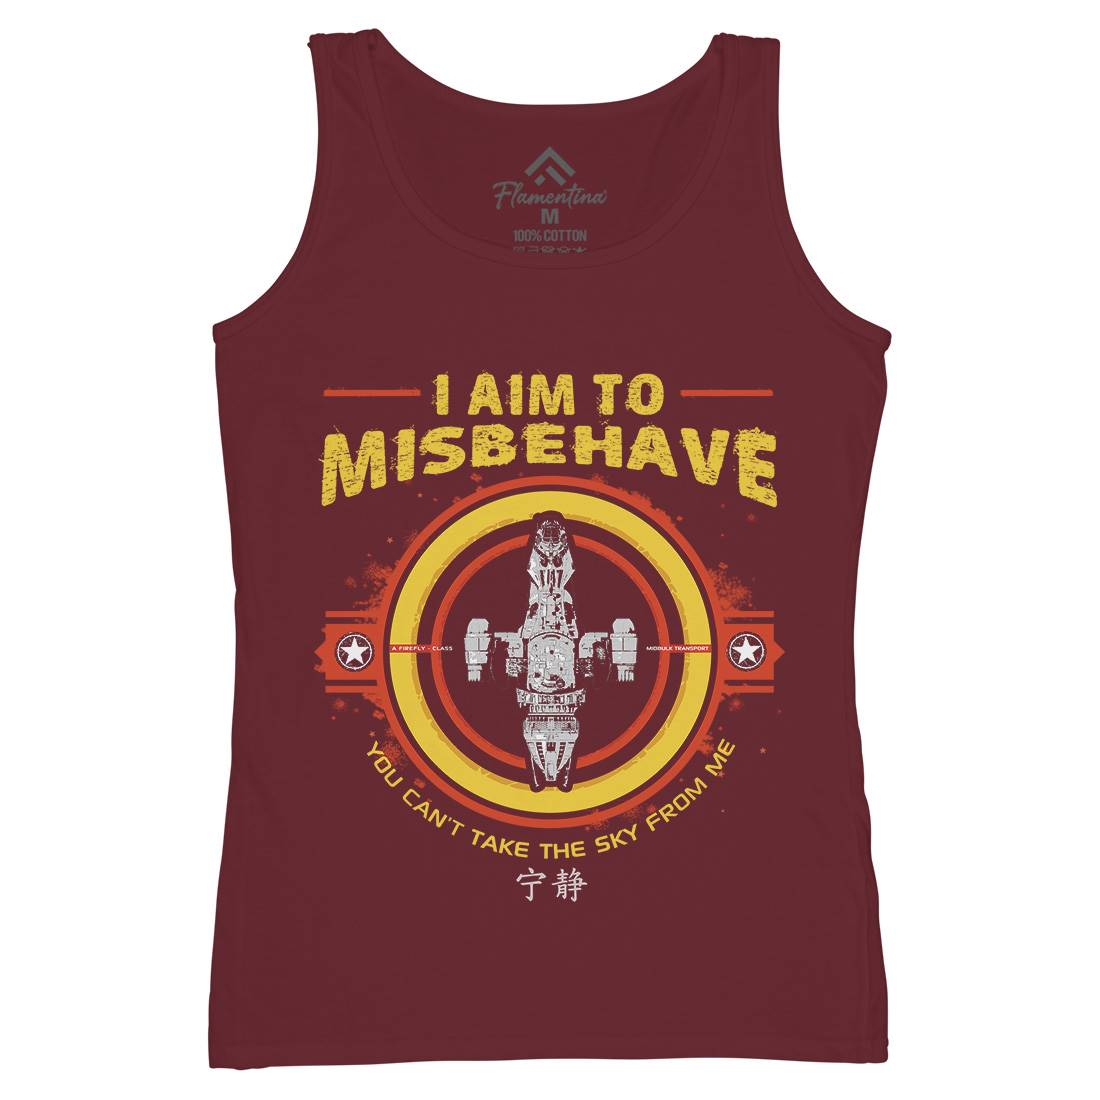 I Aim To Misbehave Womens Organic Tank Top Vest Space D352